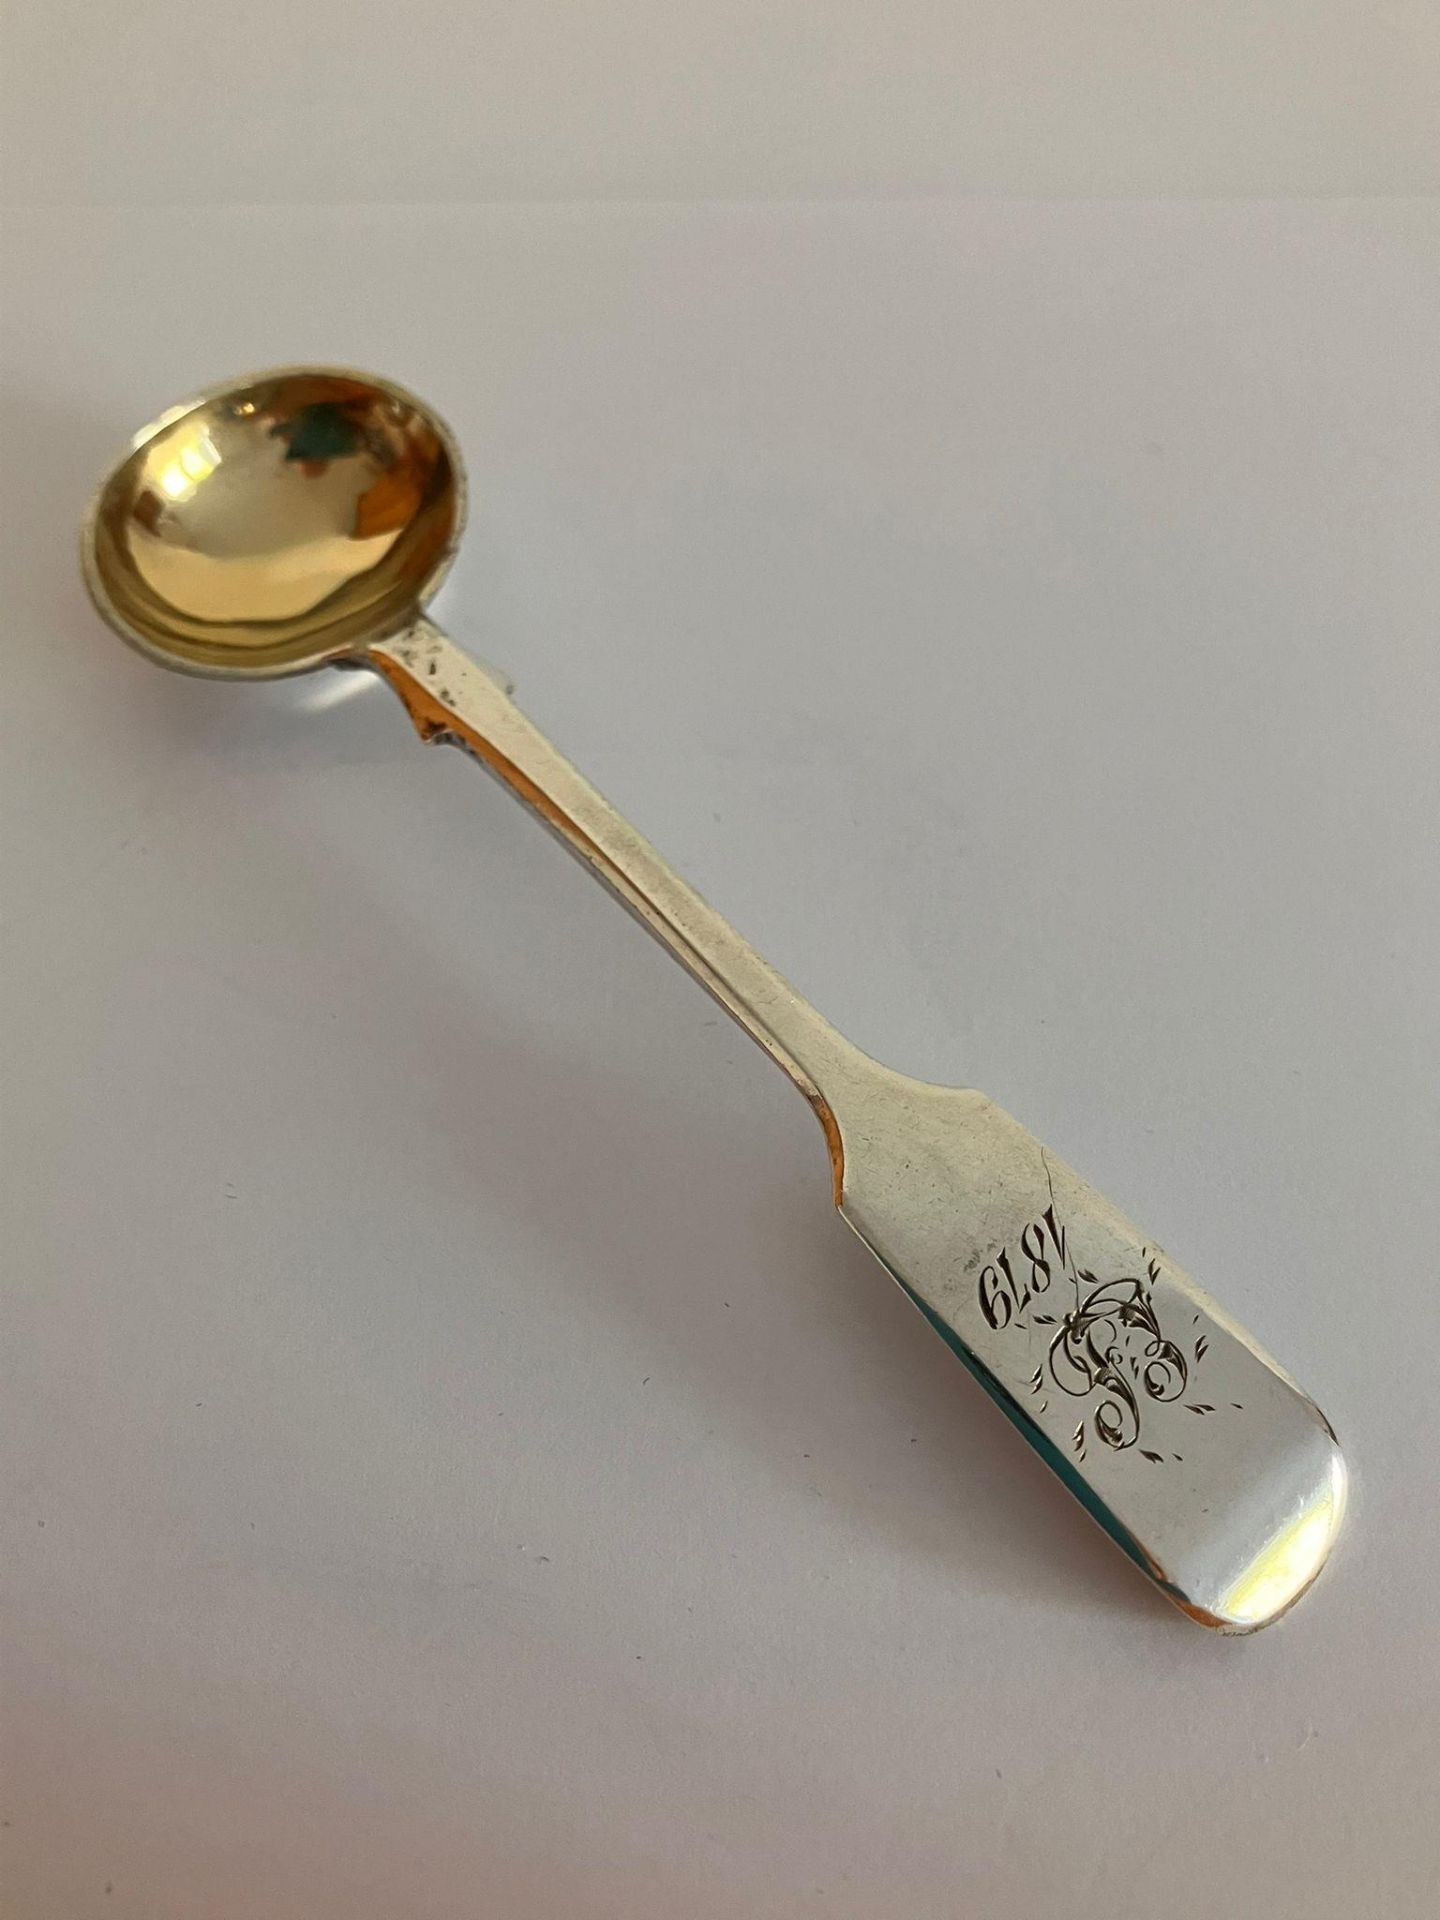 Antique SILVER CONDIMENT SPOON with Gilded Bowl. Clear Hallmark for John Stone, Exeter 1854. - Bild 6 aus 7